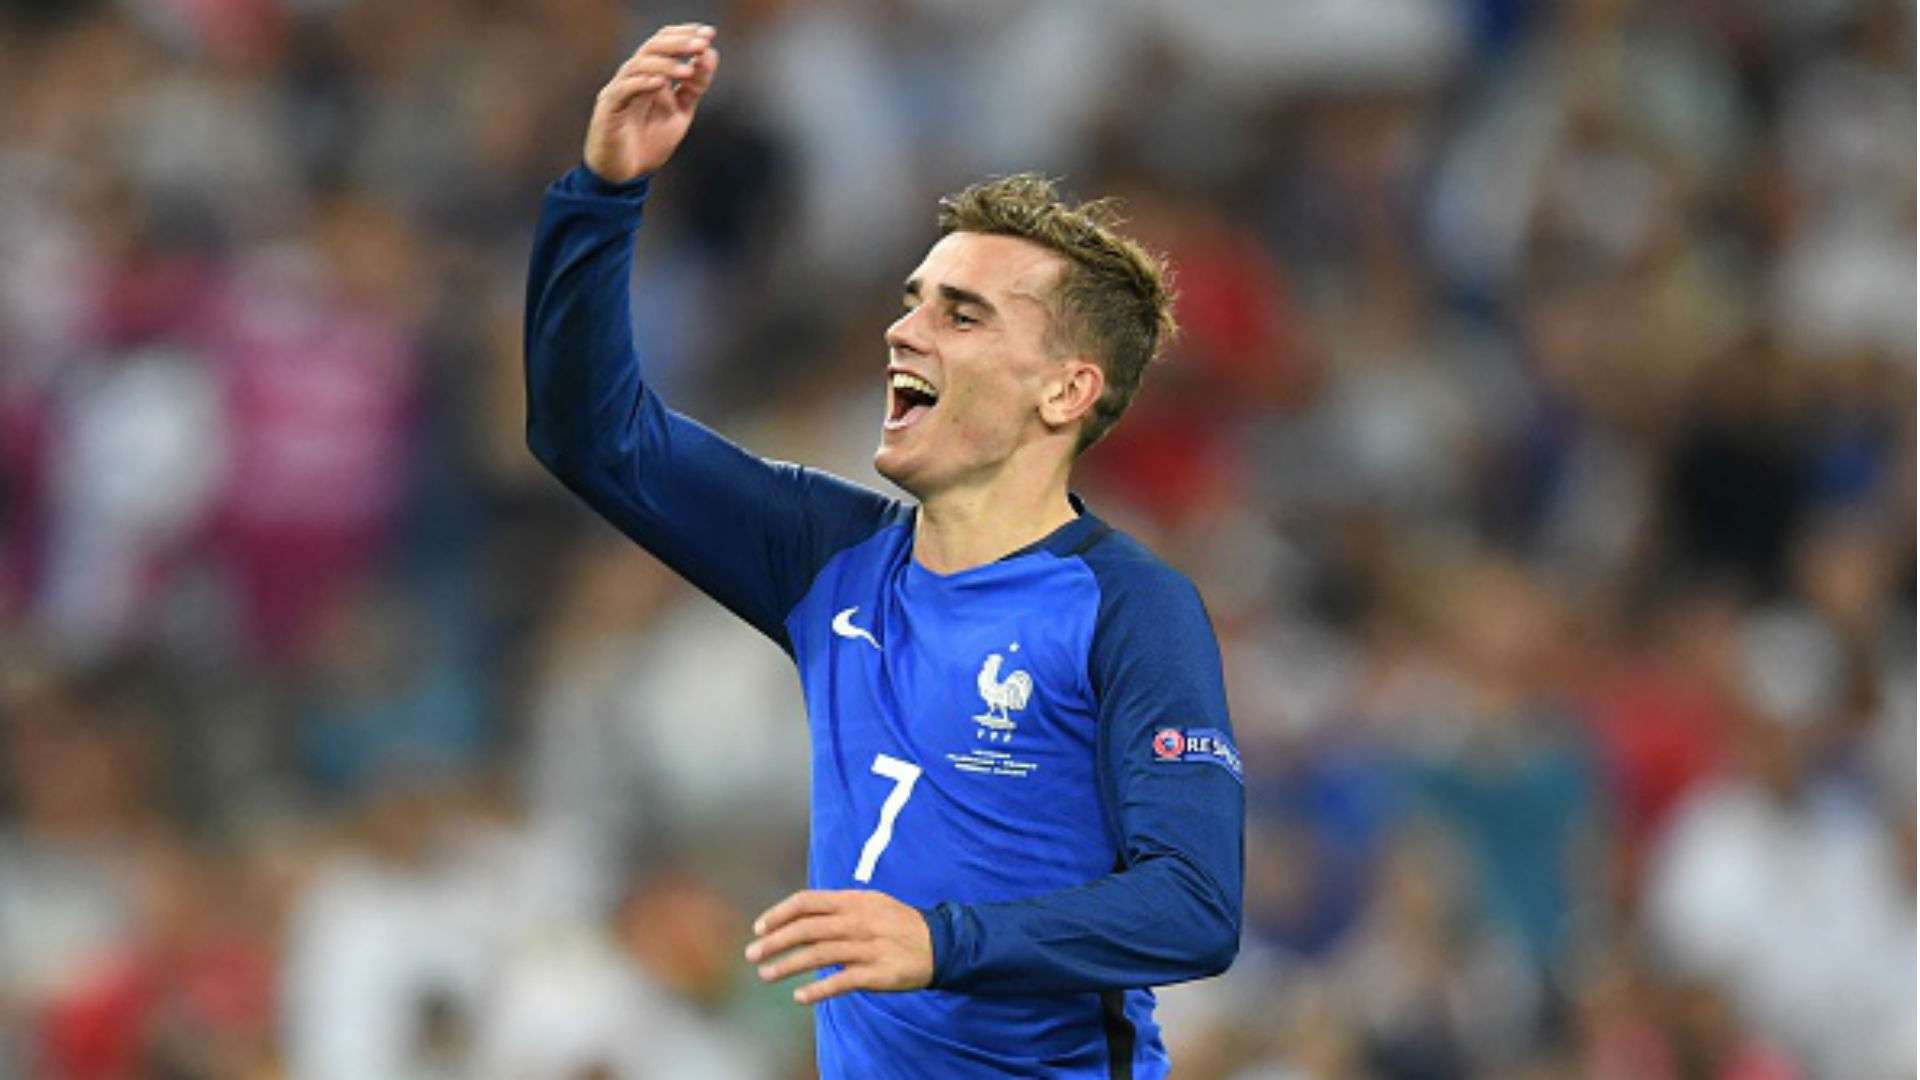 Griezmann named player of the tournament